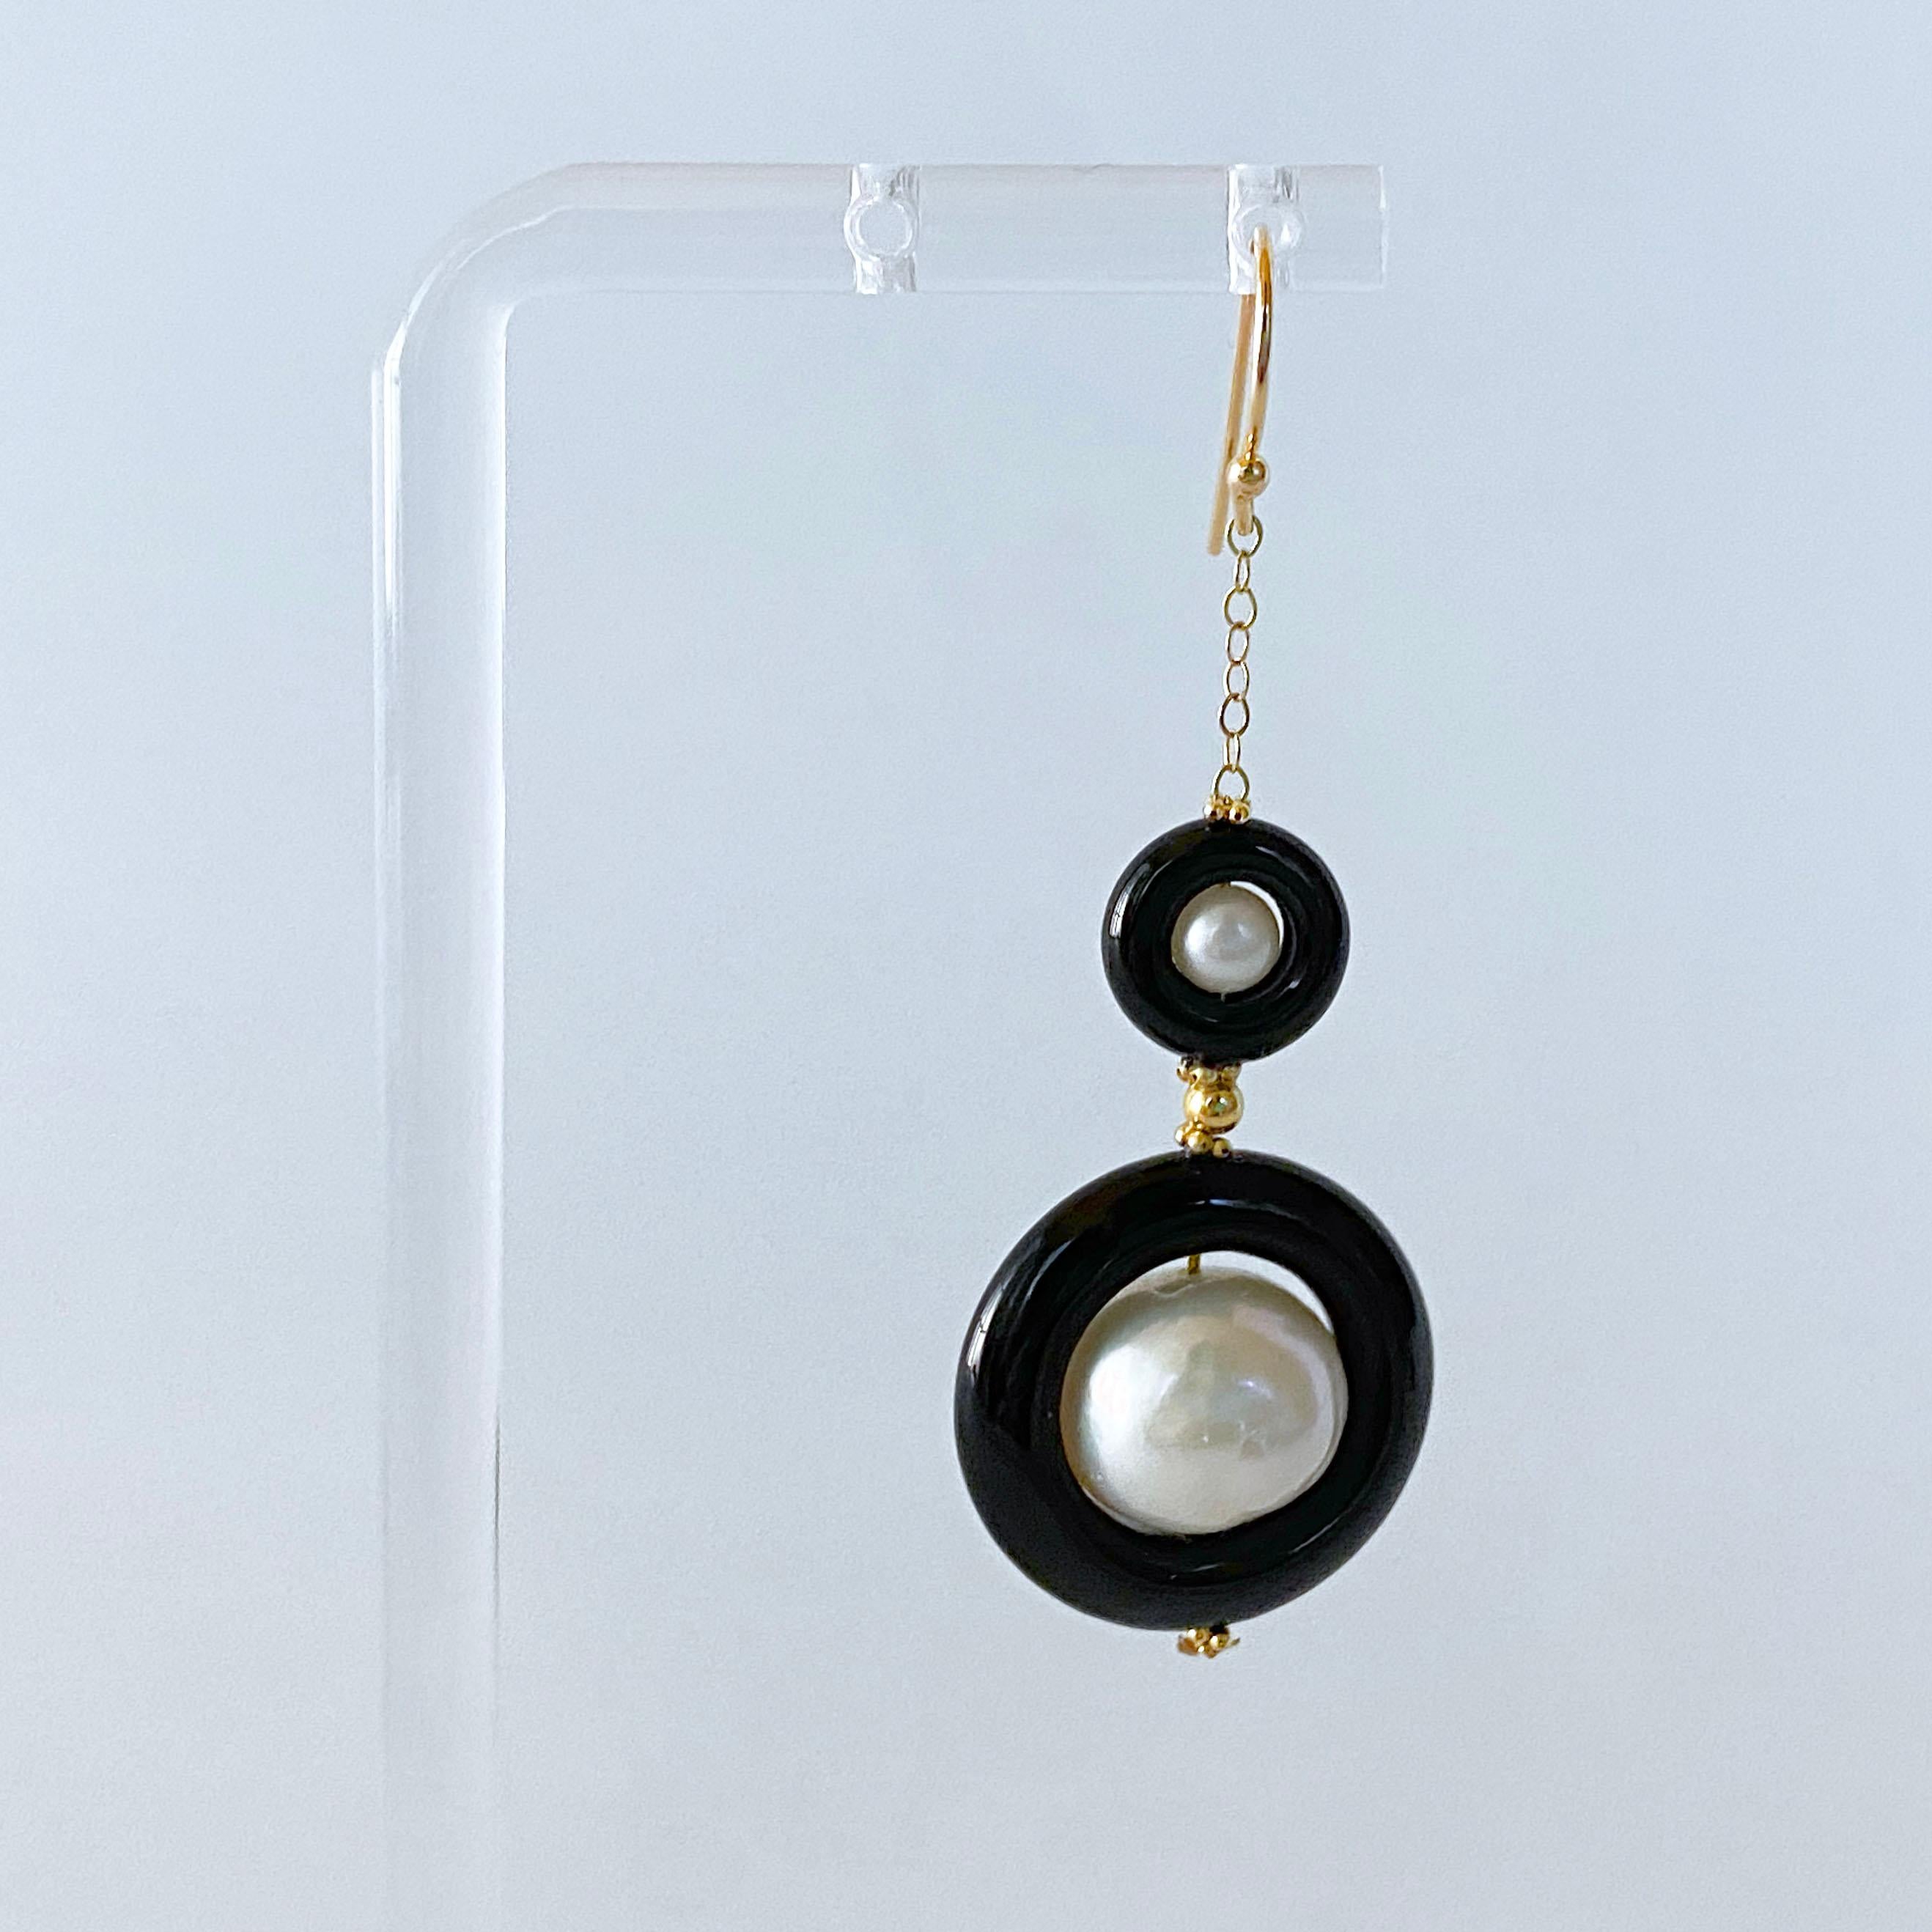 Bead Marina J. 2 Tier Pearl, Black Onyx and Solid 14k Yellow Gold Earrings  For Sale